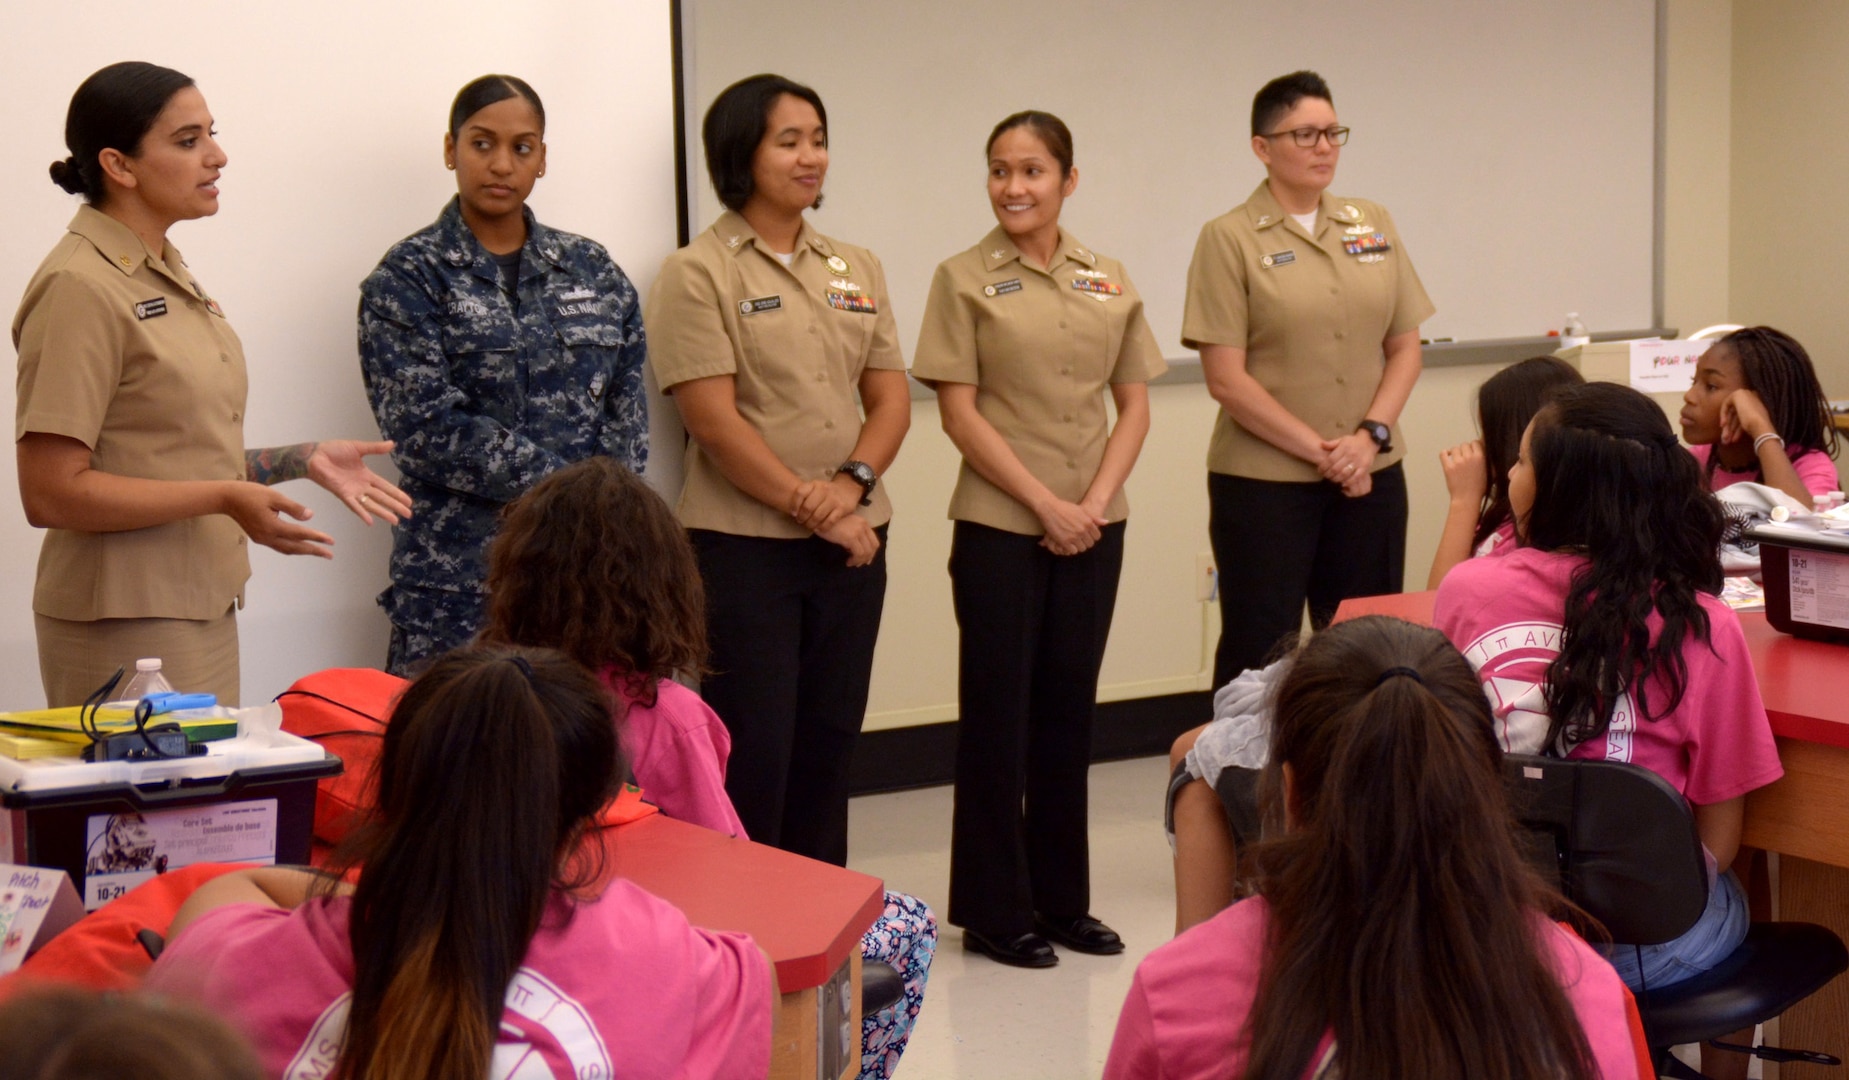 Chief Petty Officer Isabel Guerrero, Navy Reserve Officers Training Corps coordinator for Navy Recruiting District (NRD) San Antonio, joined by fellow recruiters, speaks with middle school girls during SeaPerch Day held at the Ann Barshop Natatorium on the campus of the University of the Incarnate Word as a part of the miniGEMS (Girls in Engineering, Math and Sciences) Science, Technology, Engineering, and Mathematics (STEM) Camp.  SeaPerch is an innovative underwater robotics program that equips teachers and students with the resources they need to build an underwater ROV in an in-school or out-of-school setting.